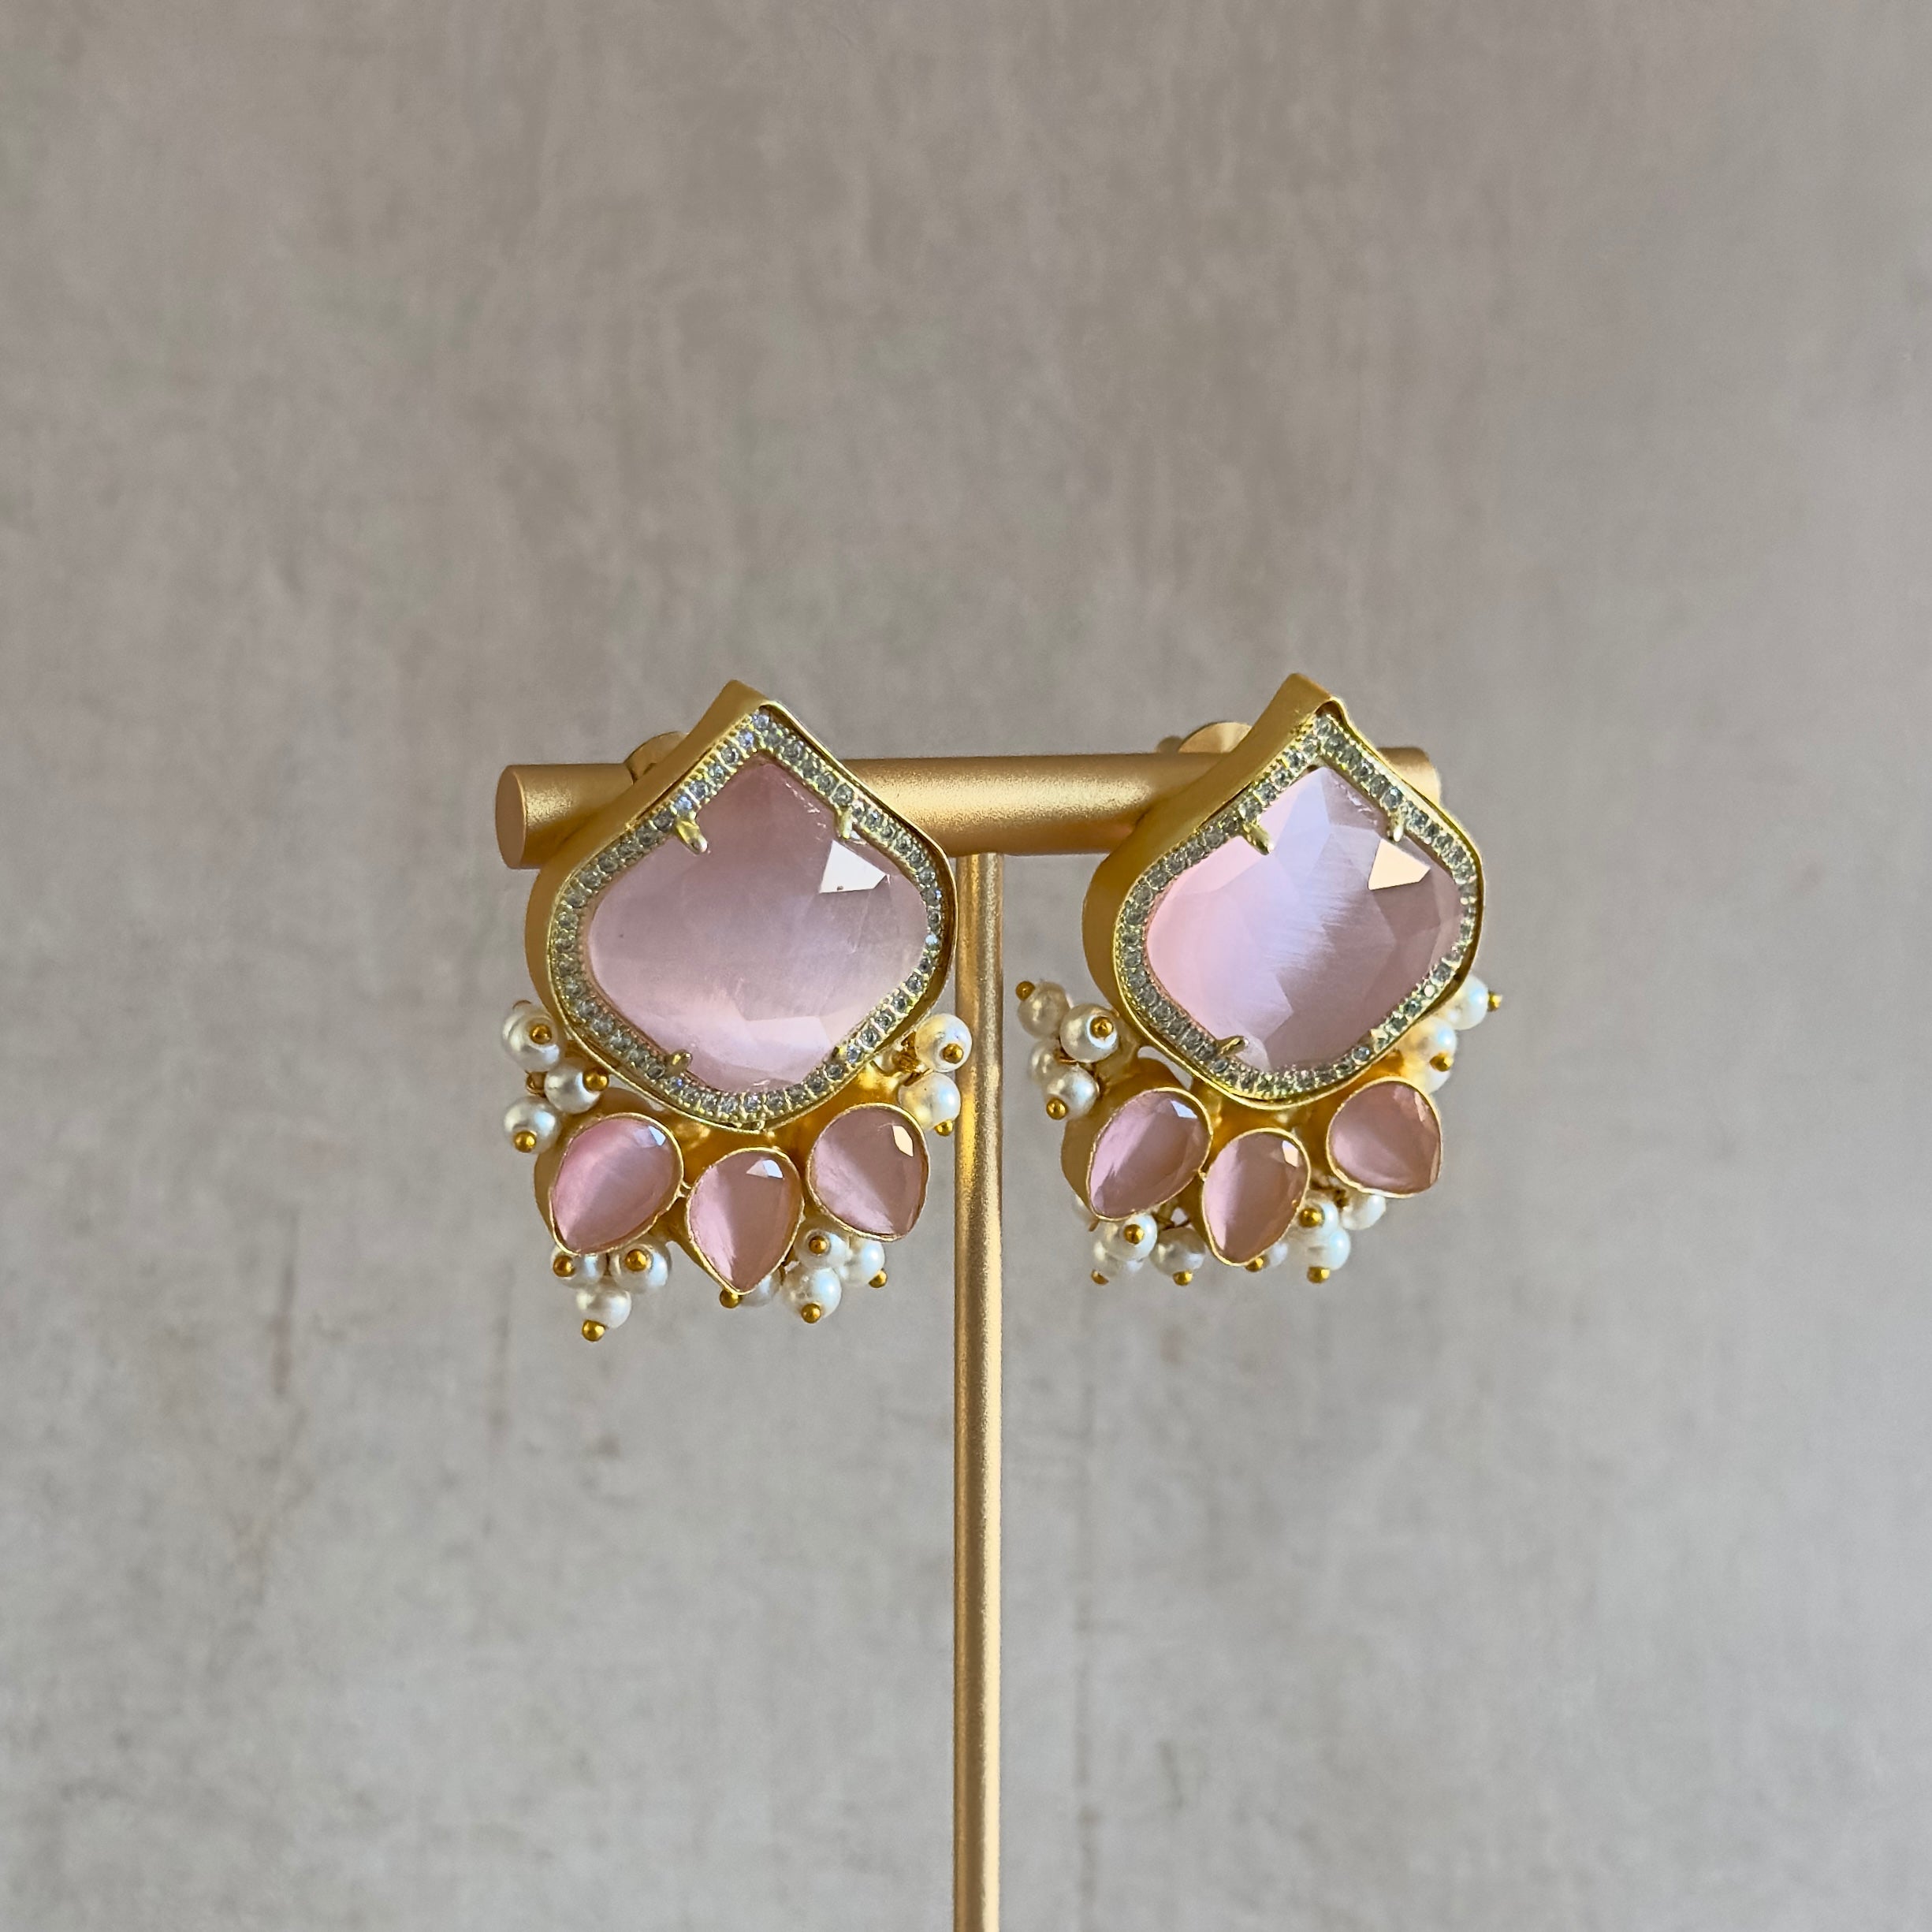 Unleash your inner sparkle with our Aria Pink Stud Earrings. Featuring stunning pink stones and sparkling CZ crystals, these earrings will add a touch of glamour to any outfit. Elevate your style and make a statement with these timeless studs.